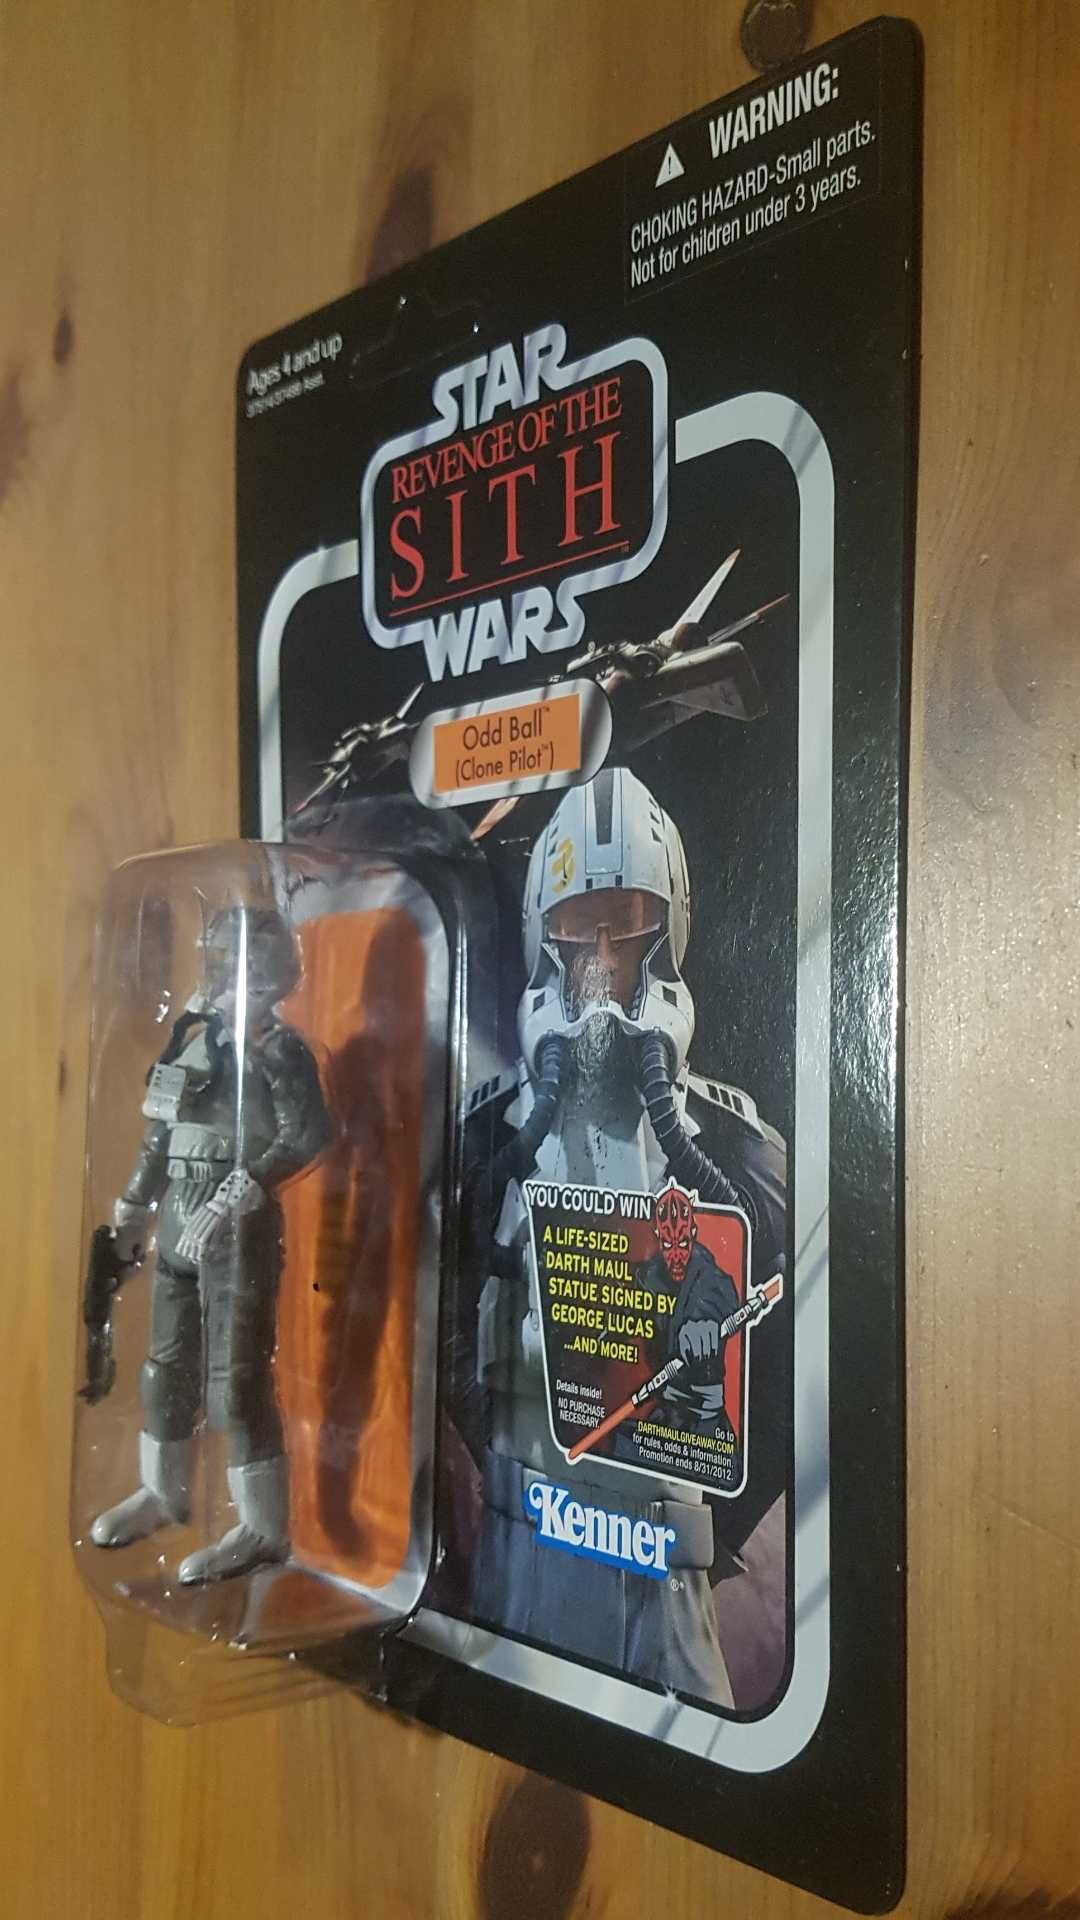 Star Wars Vintage Collection 3.75 - ODD BALL VC97 (Clone Pilot) 2012